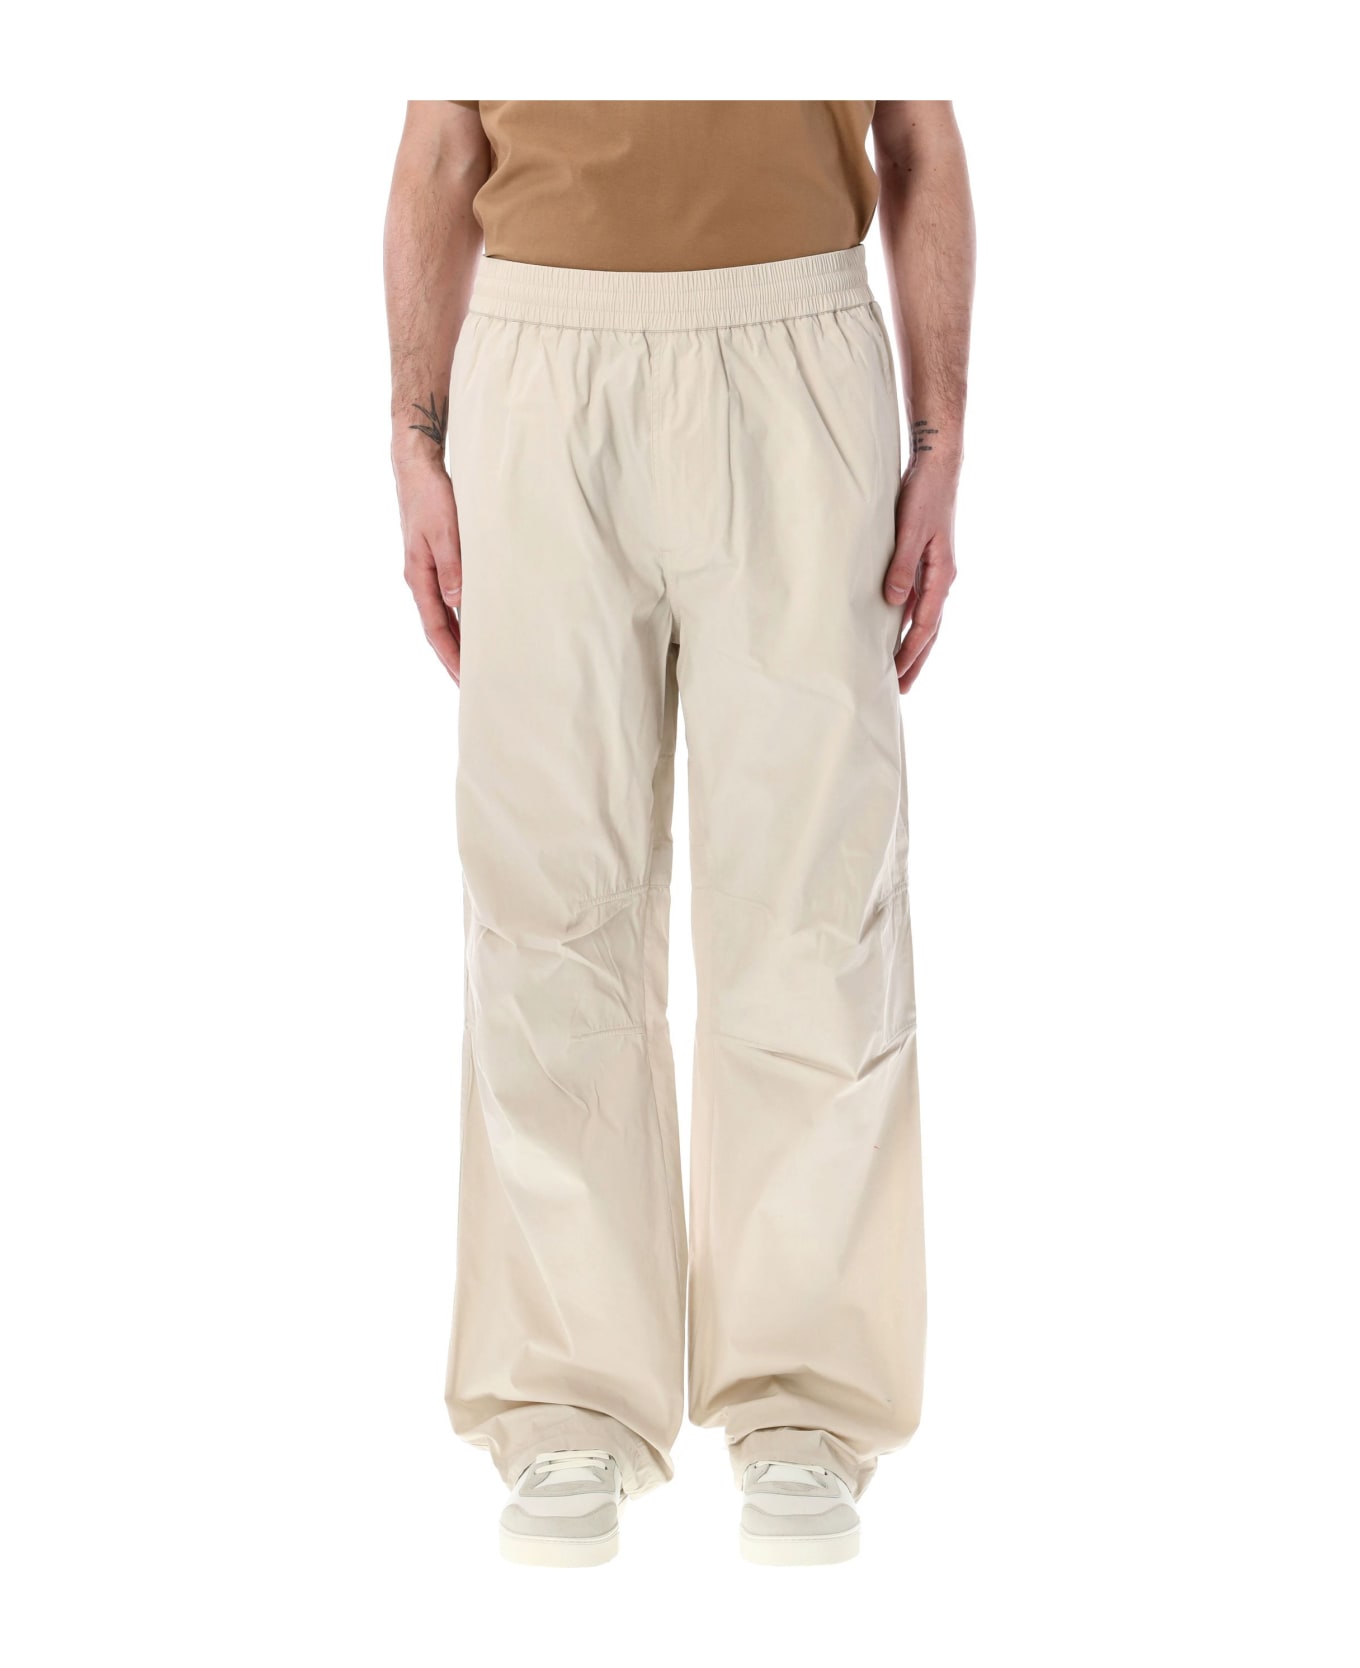 Burberry London Cargo Trousers - WHEAT ボトムス